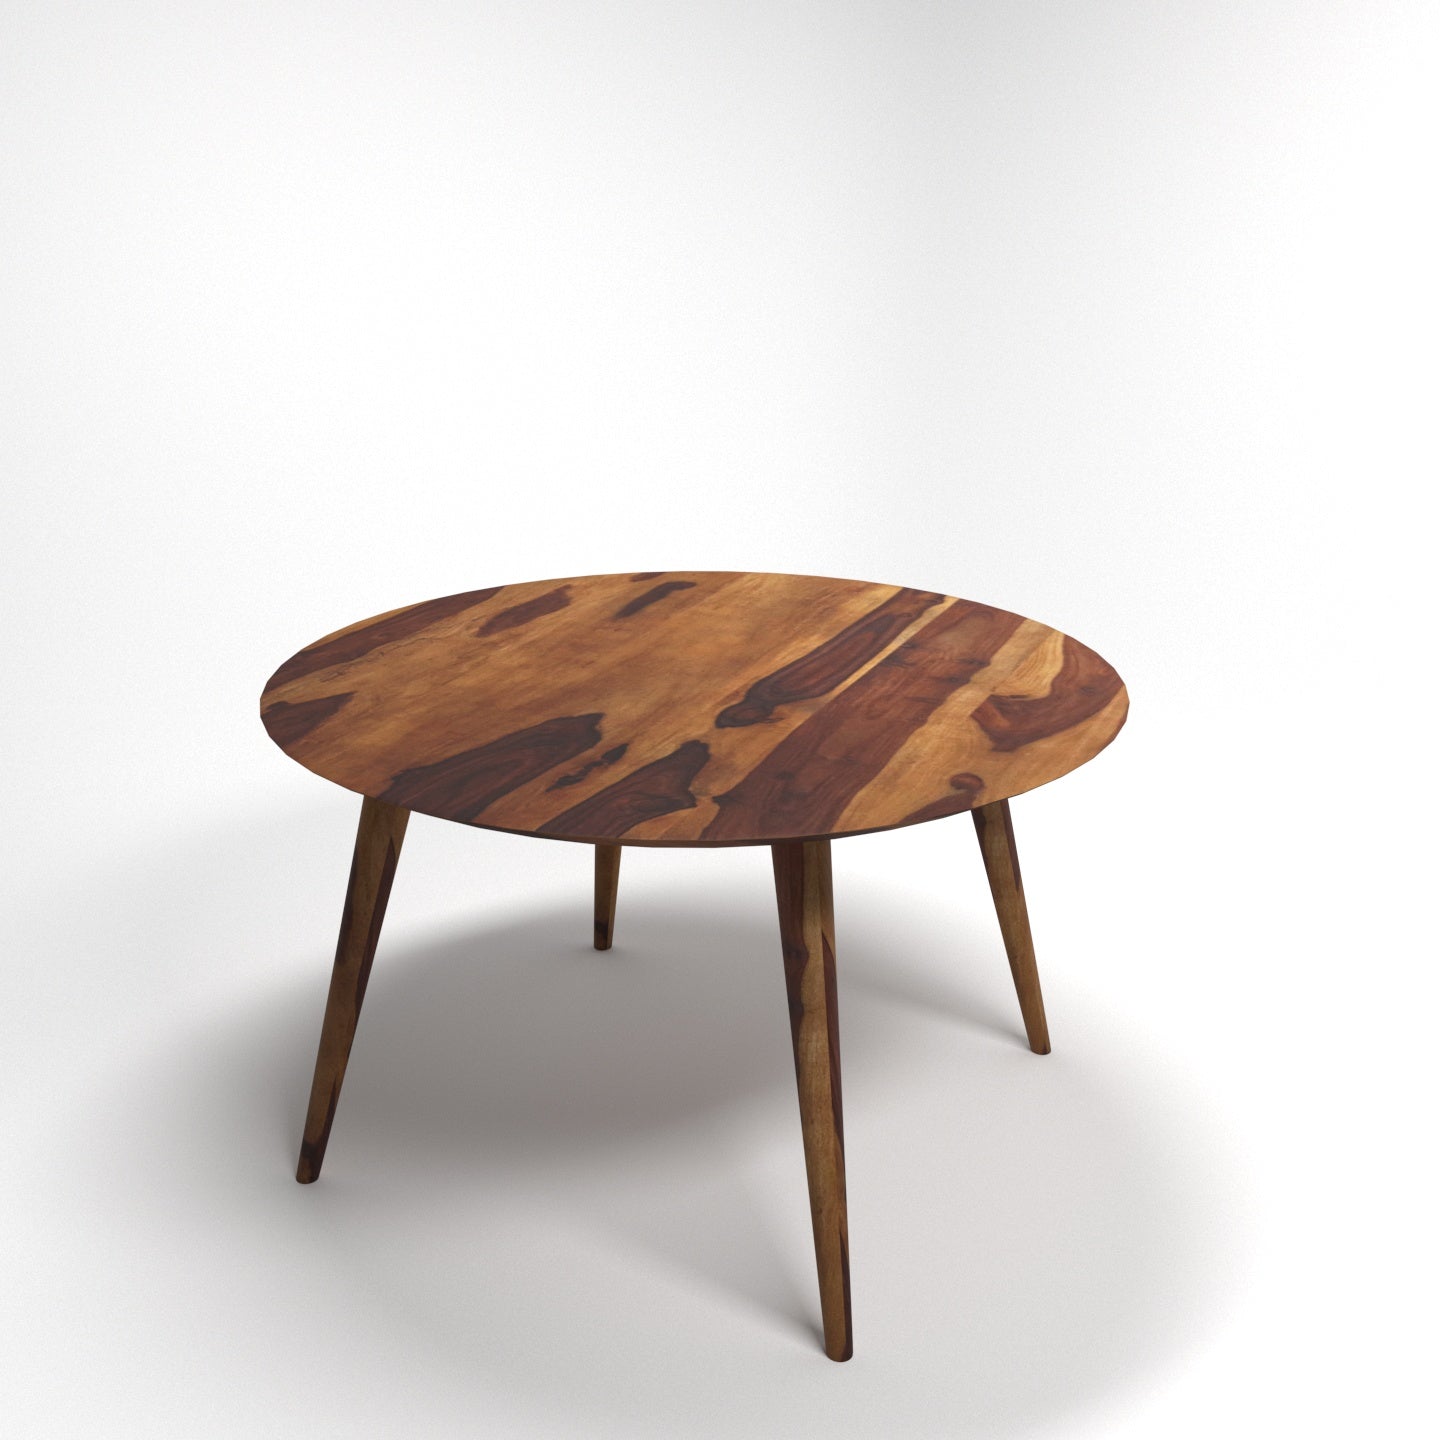 Classic Round Table Sheesham Wood Four Legs Dining Table